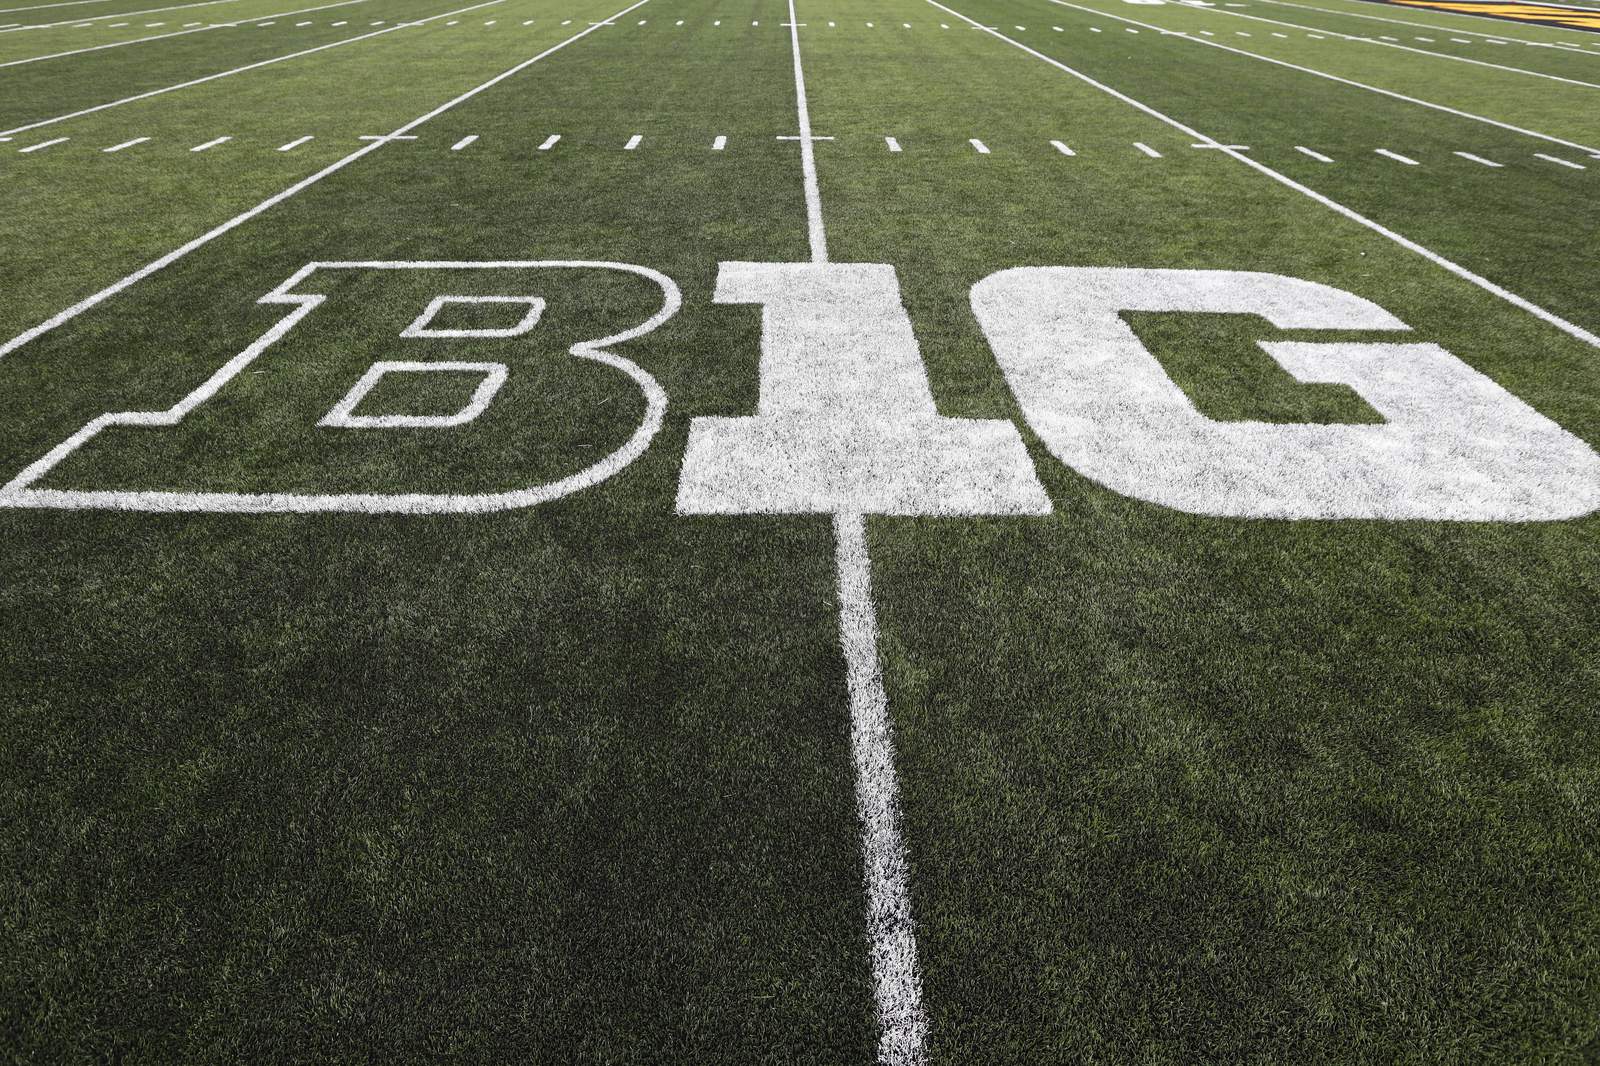 Big Ten reinstates fall football season, with games scheduled to begin Oct. 23-24